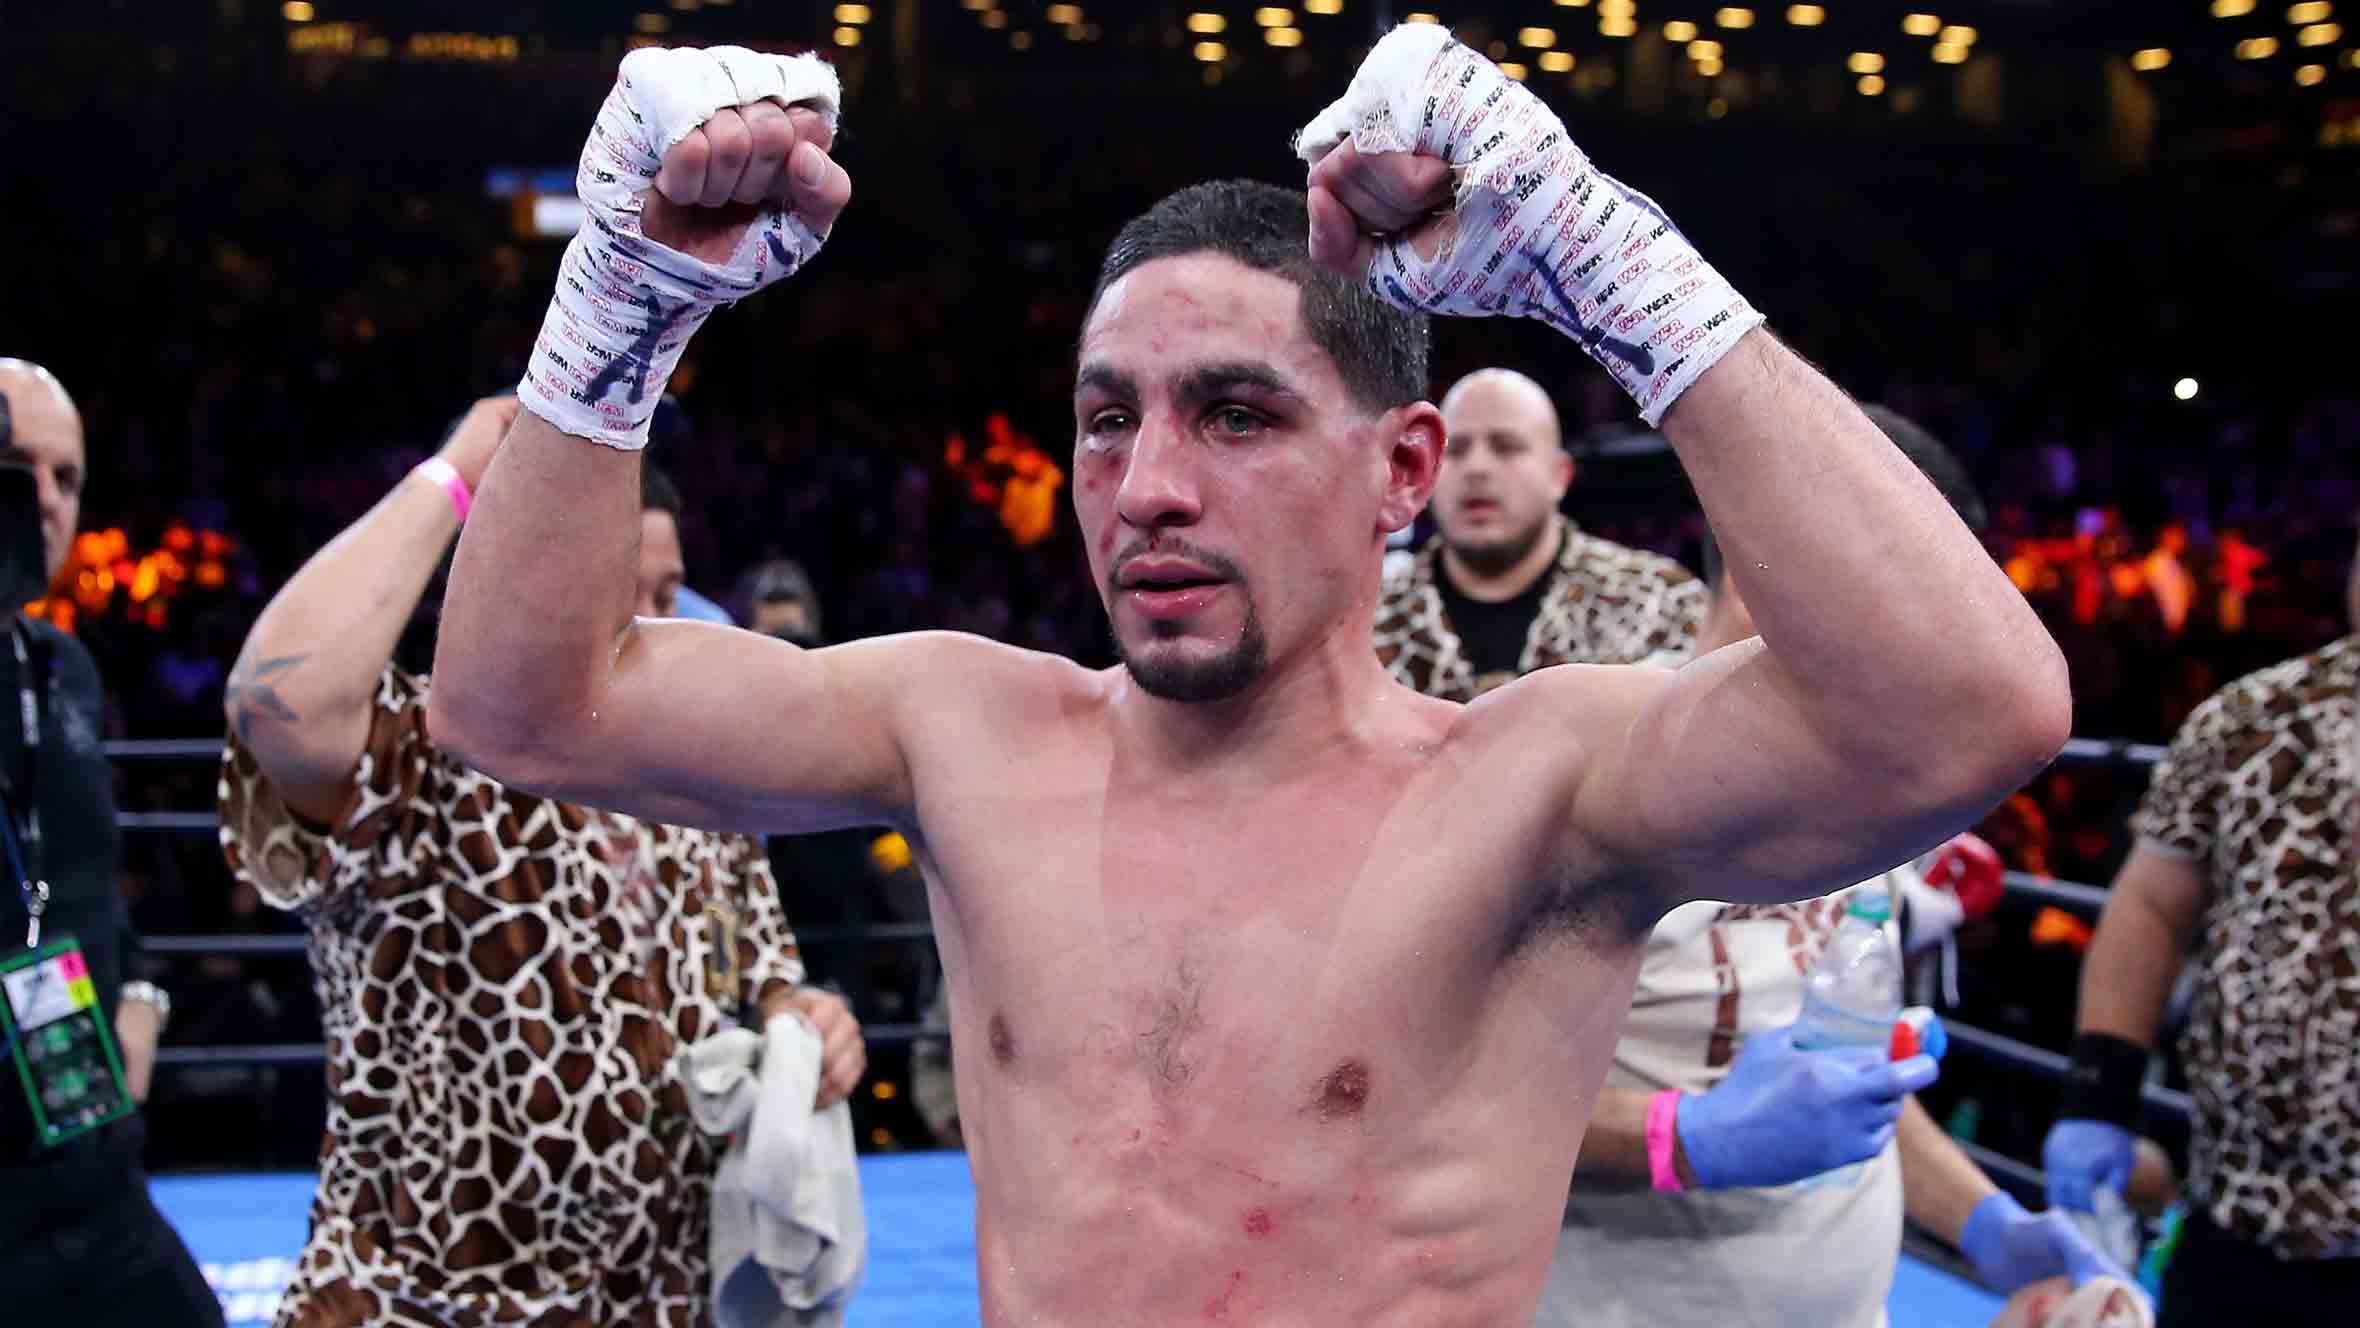 Danny Garcia eyeing move to 147 after win over Lamont Peterson2360 x 1328